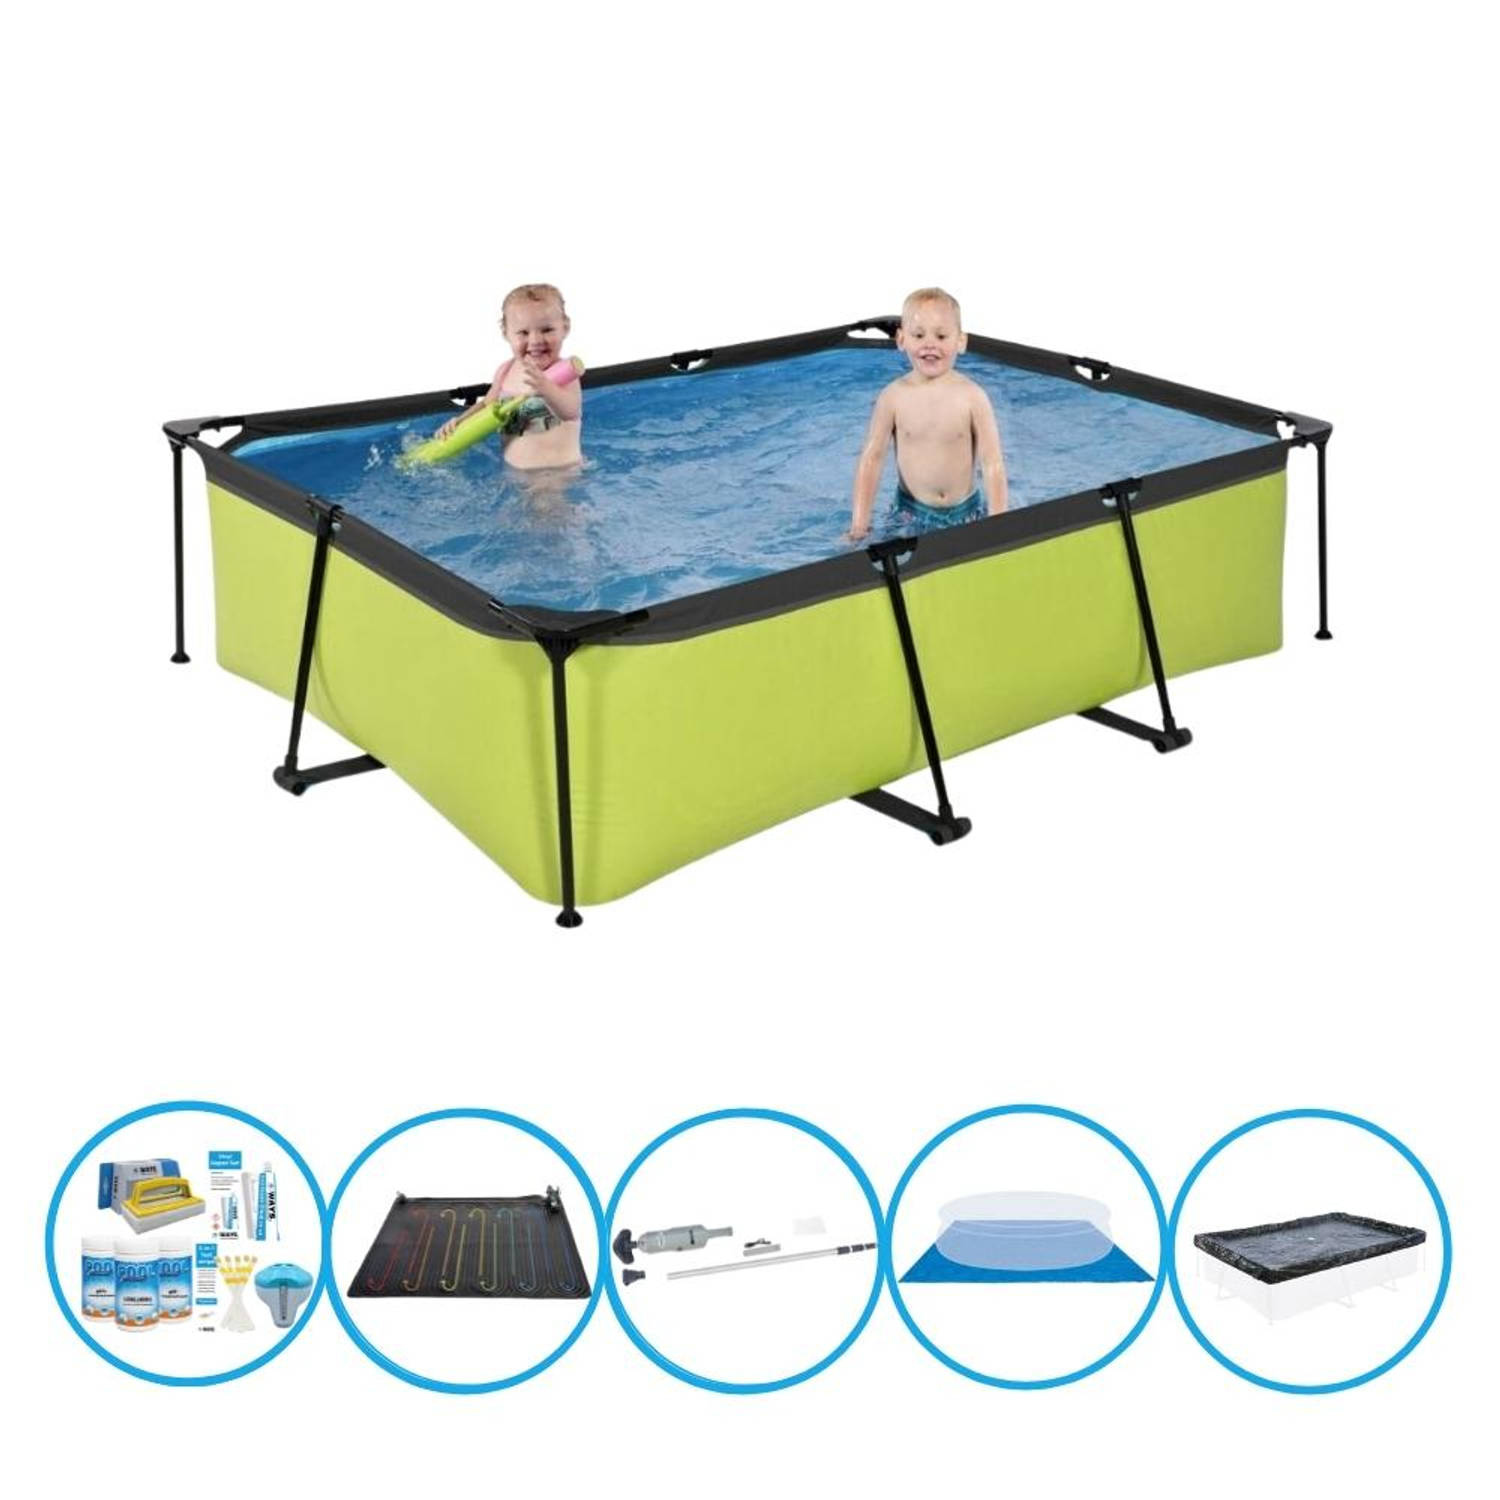 EXIT Toys Exit Zwembad Lime - Frame Pool 220x150x60 Cm - Met Accessoires - Groen